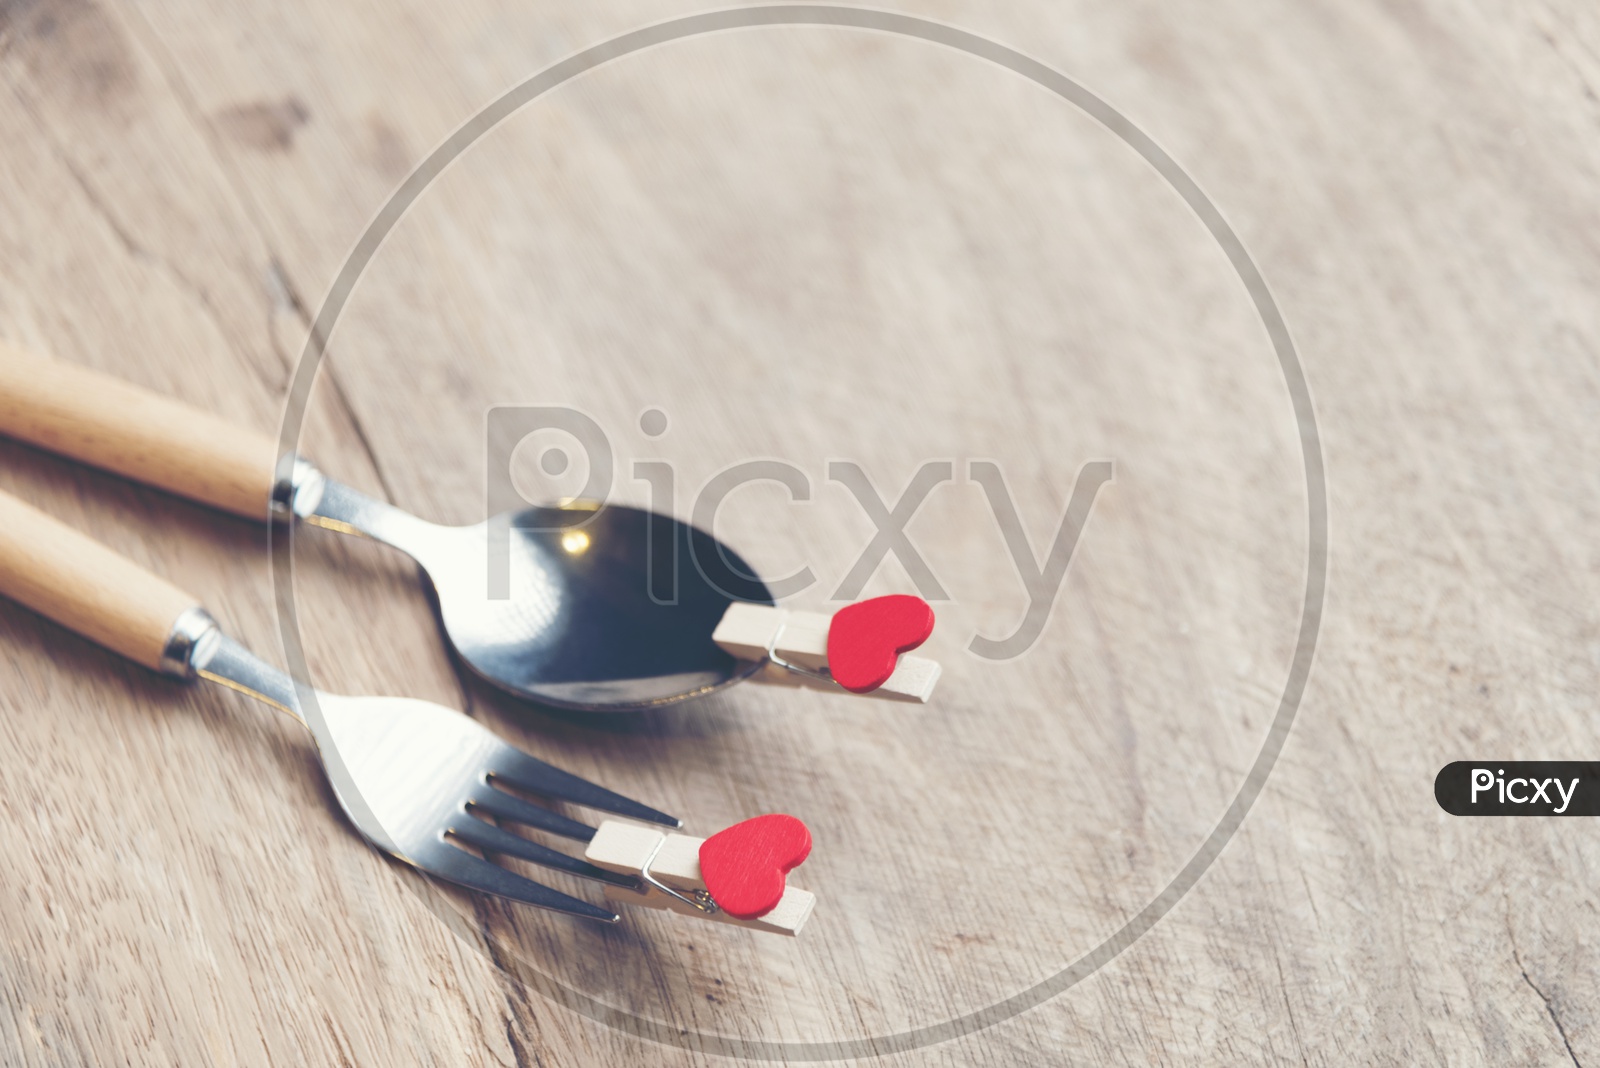 Love and  Valentines  Day Concept With Red Heart Shape Tagged To Spoon and Fork On an Wooden Table Background With Vintage Filter